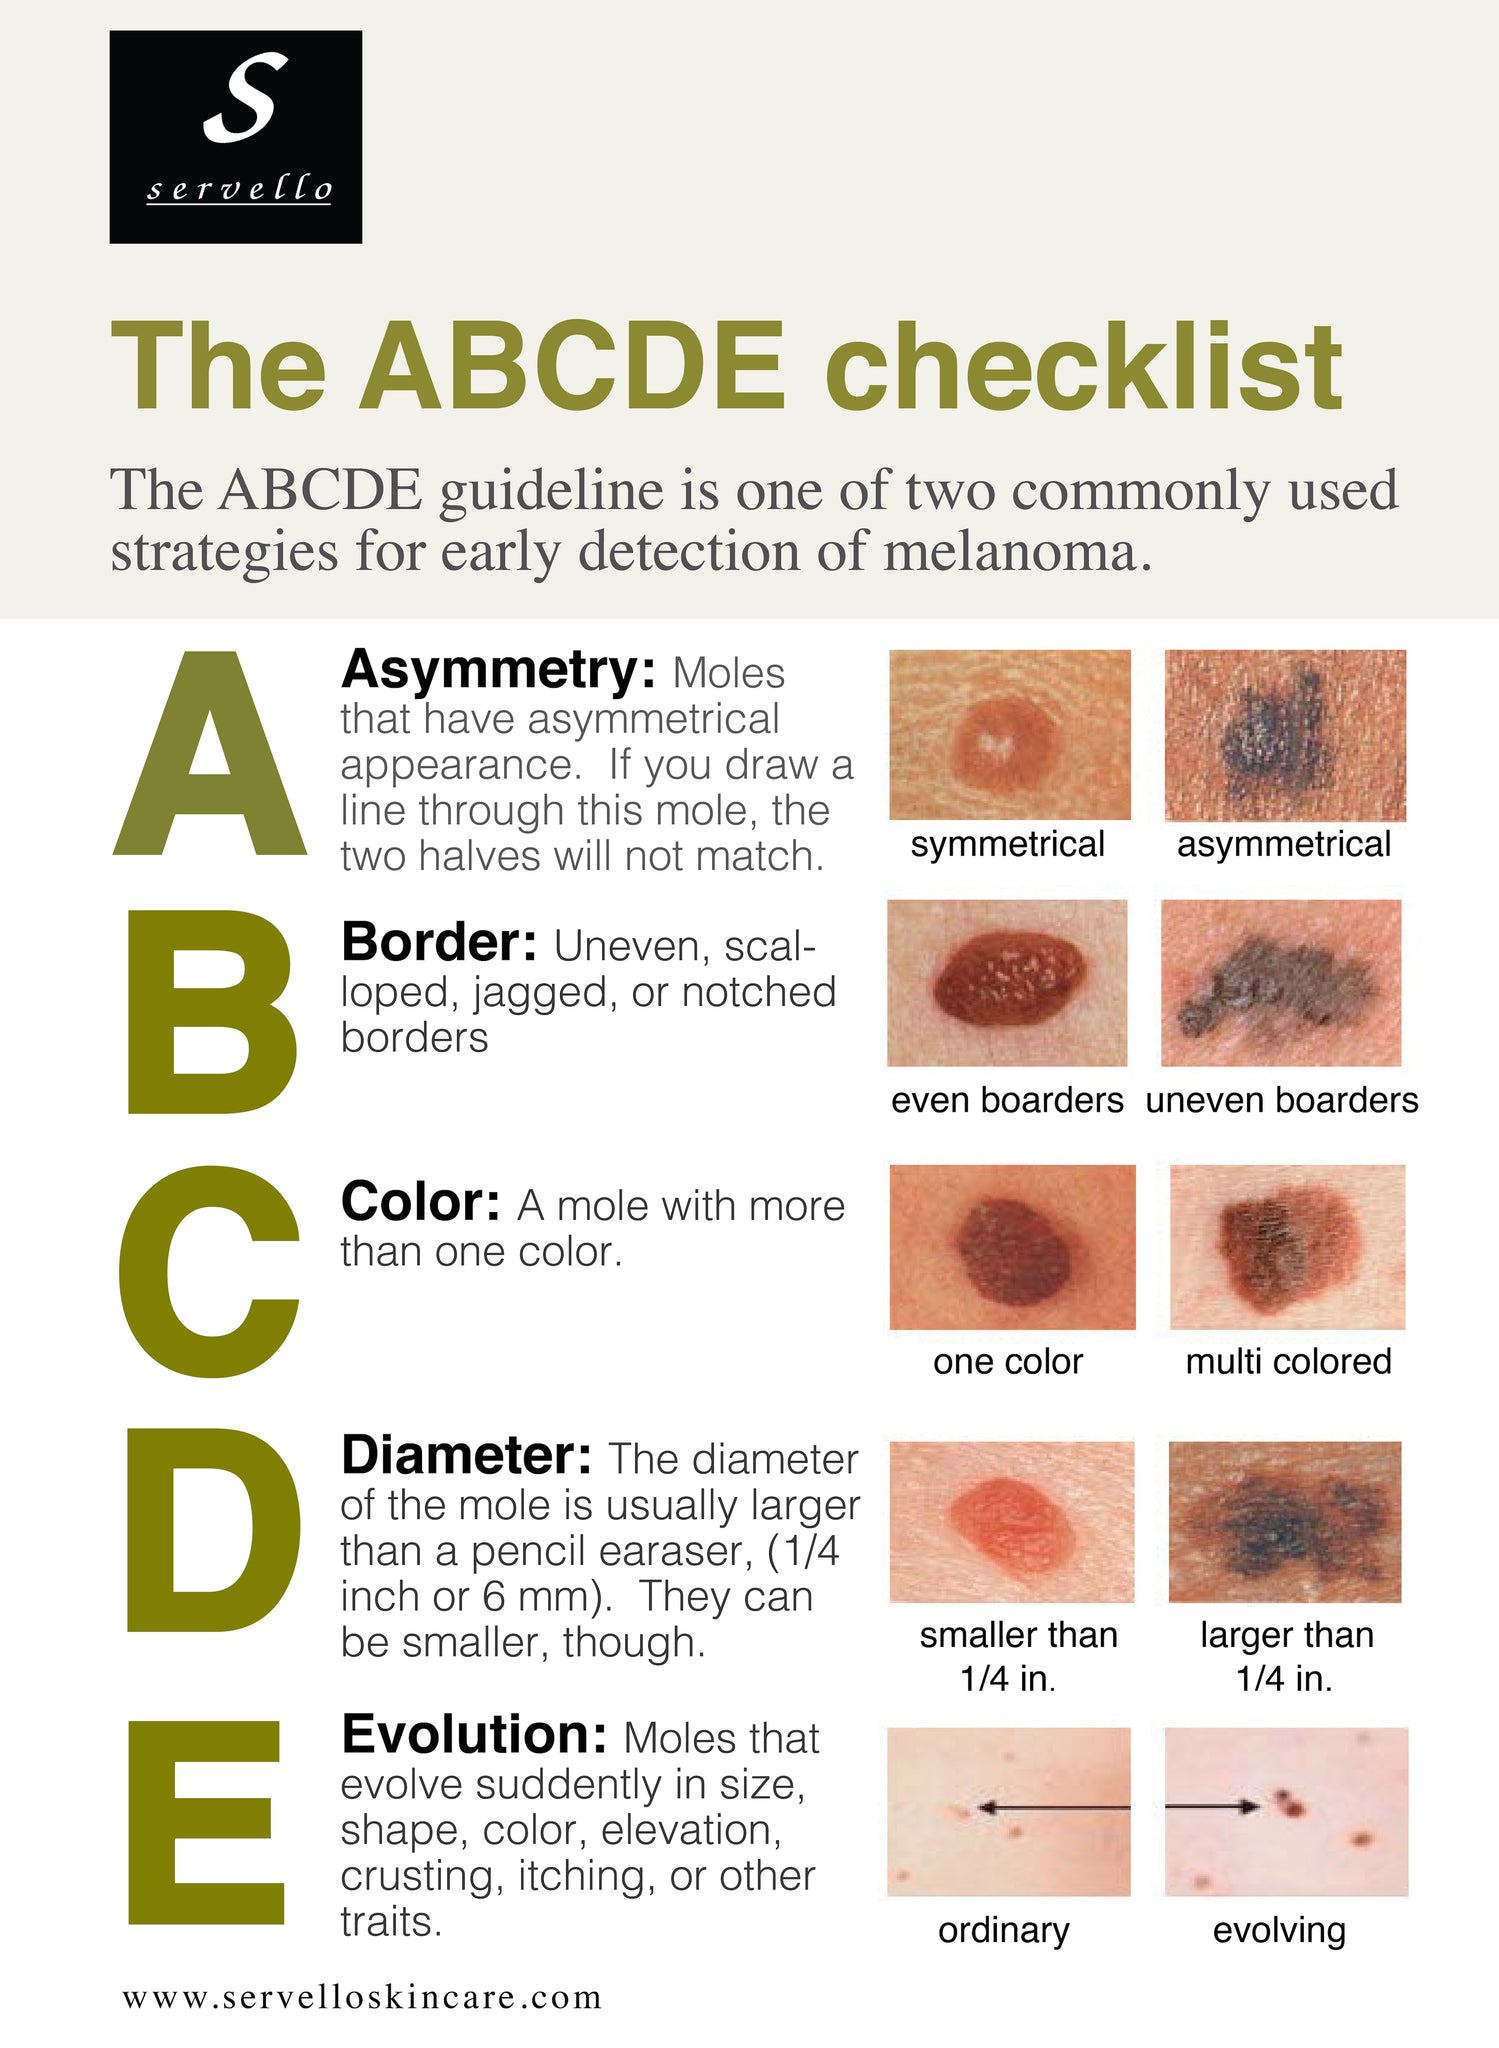 The ABCDE's of Skin Cancer